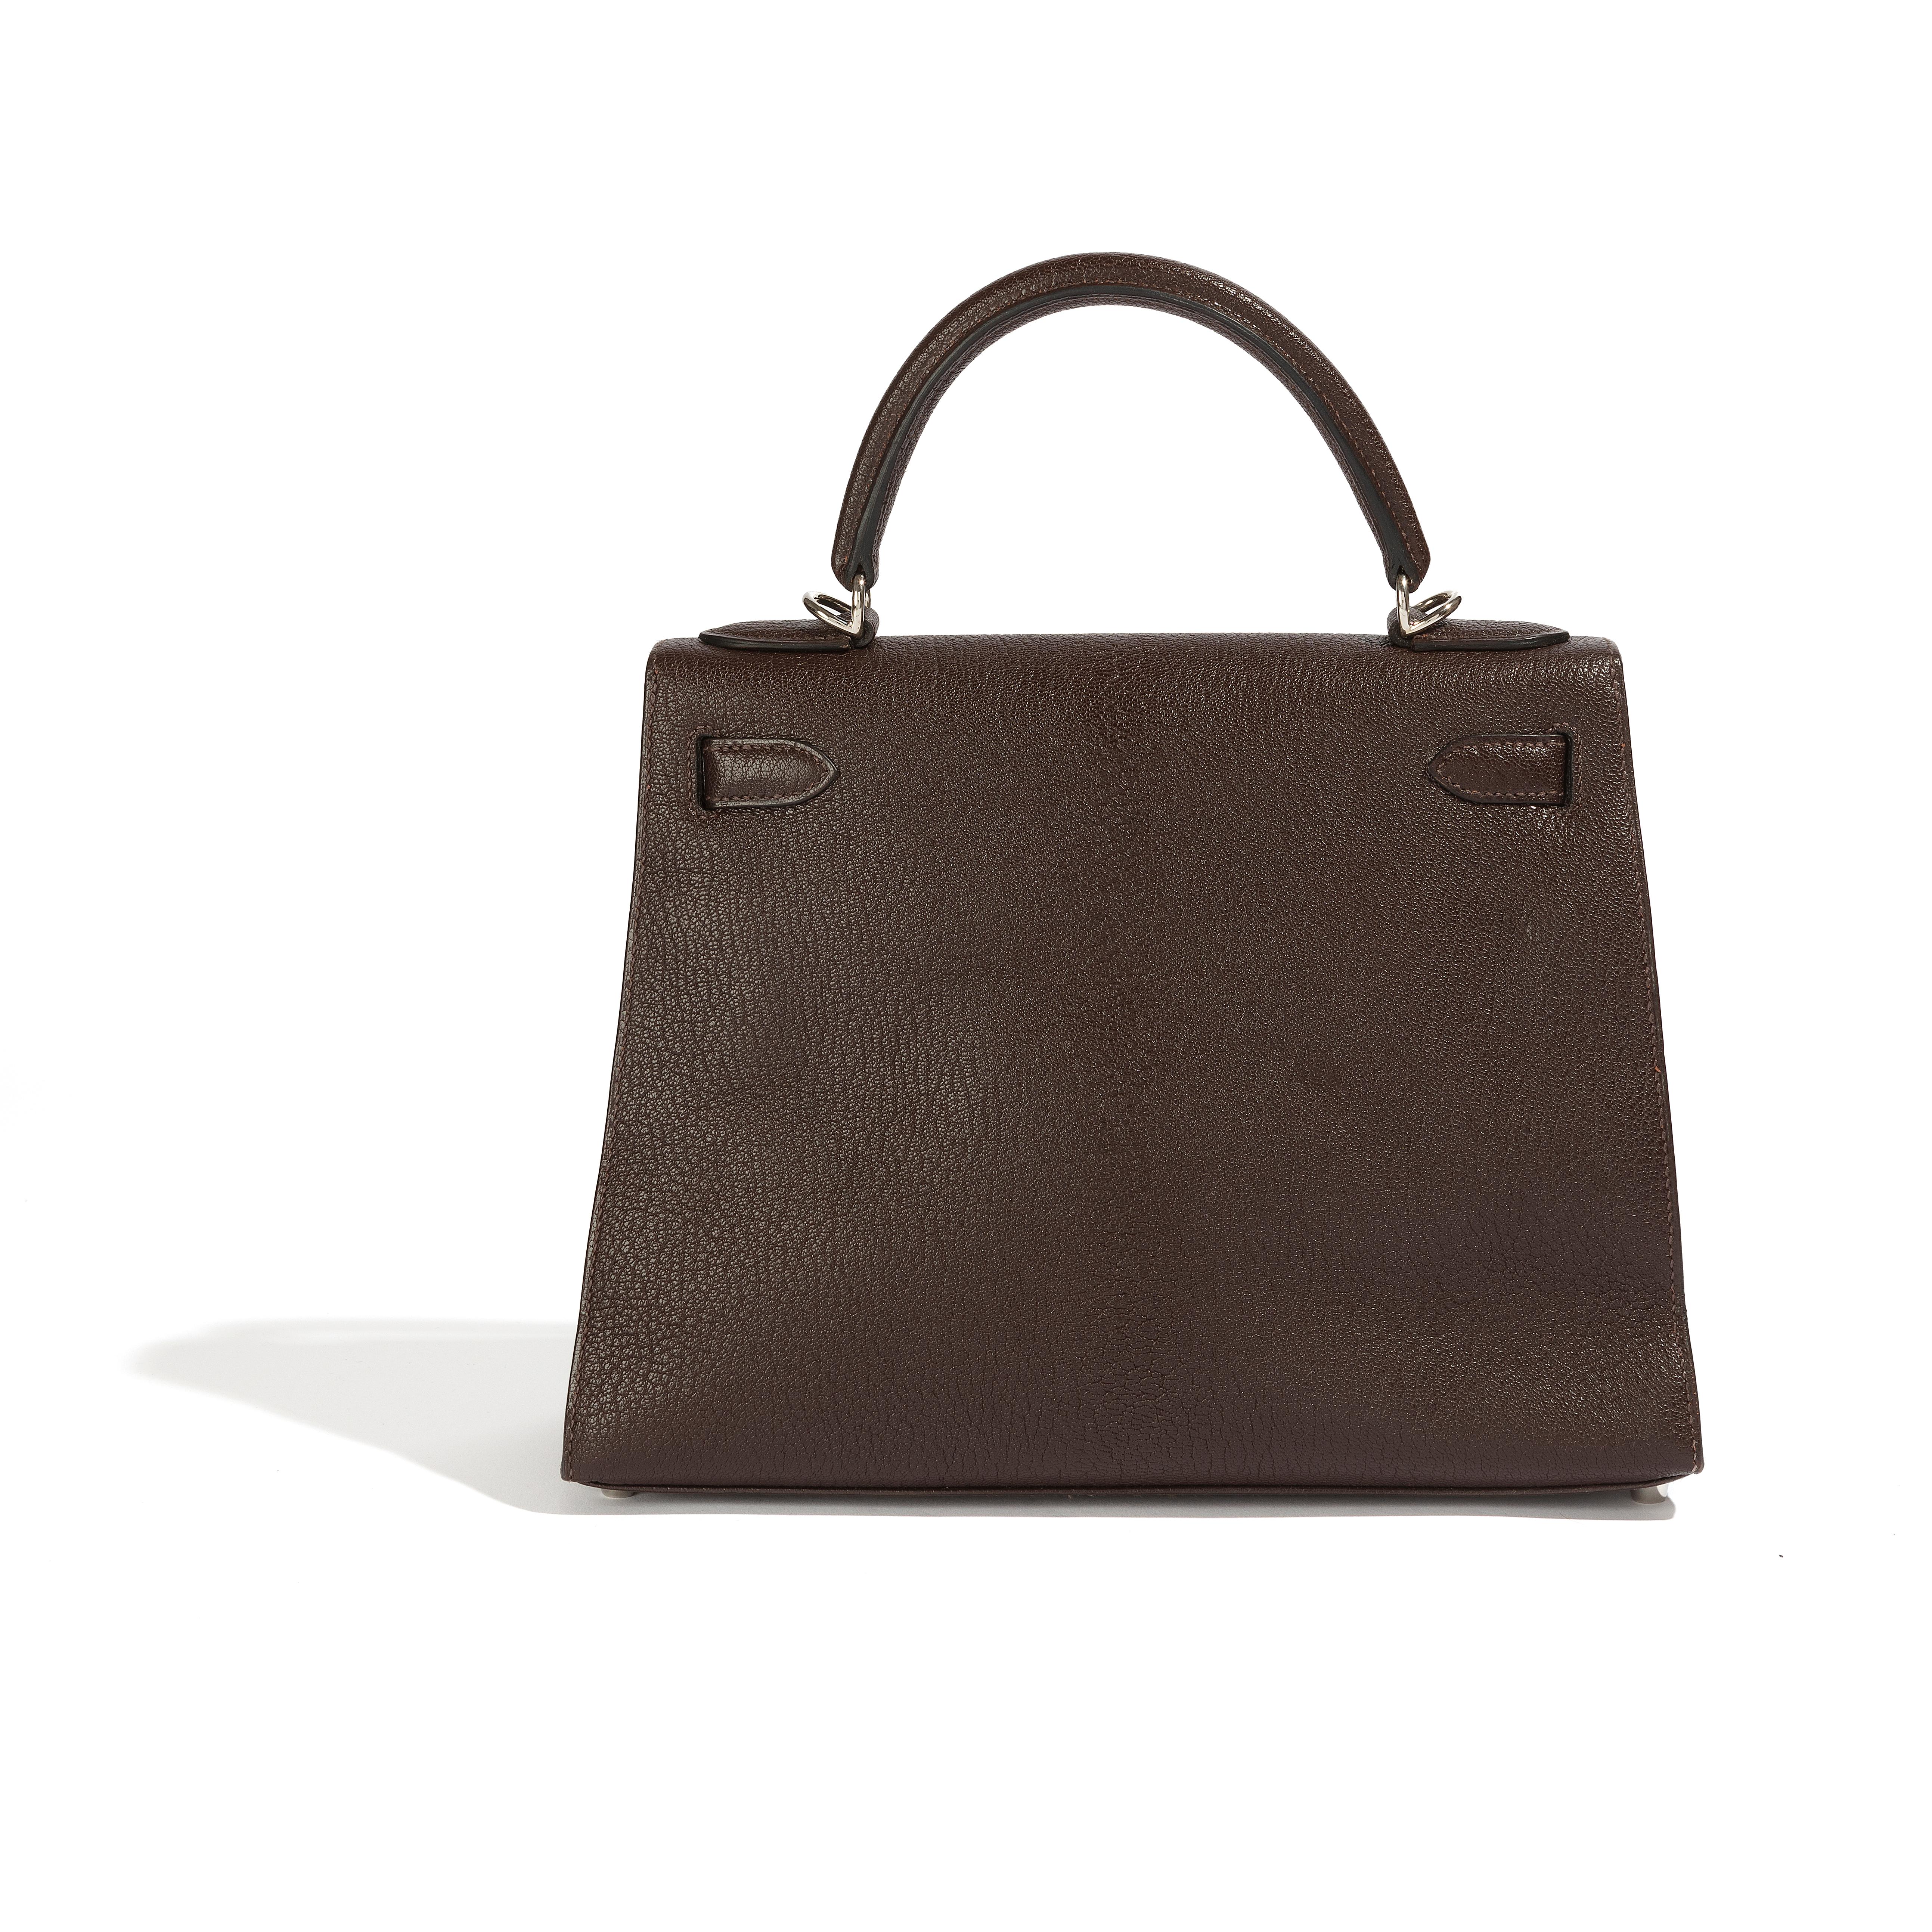 Expertly crafted Kelly 28 Sellier Brown handbag with palladium hardware. It has been used only a few times and is in very good condition. However, there is a small mark on the base and another one on the back, which you can refer to in the images